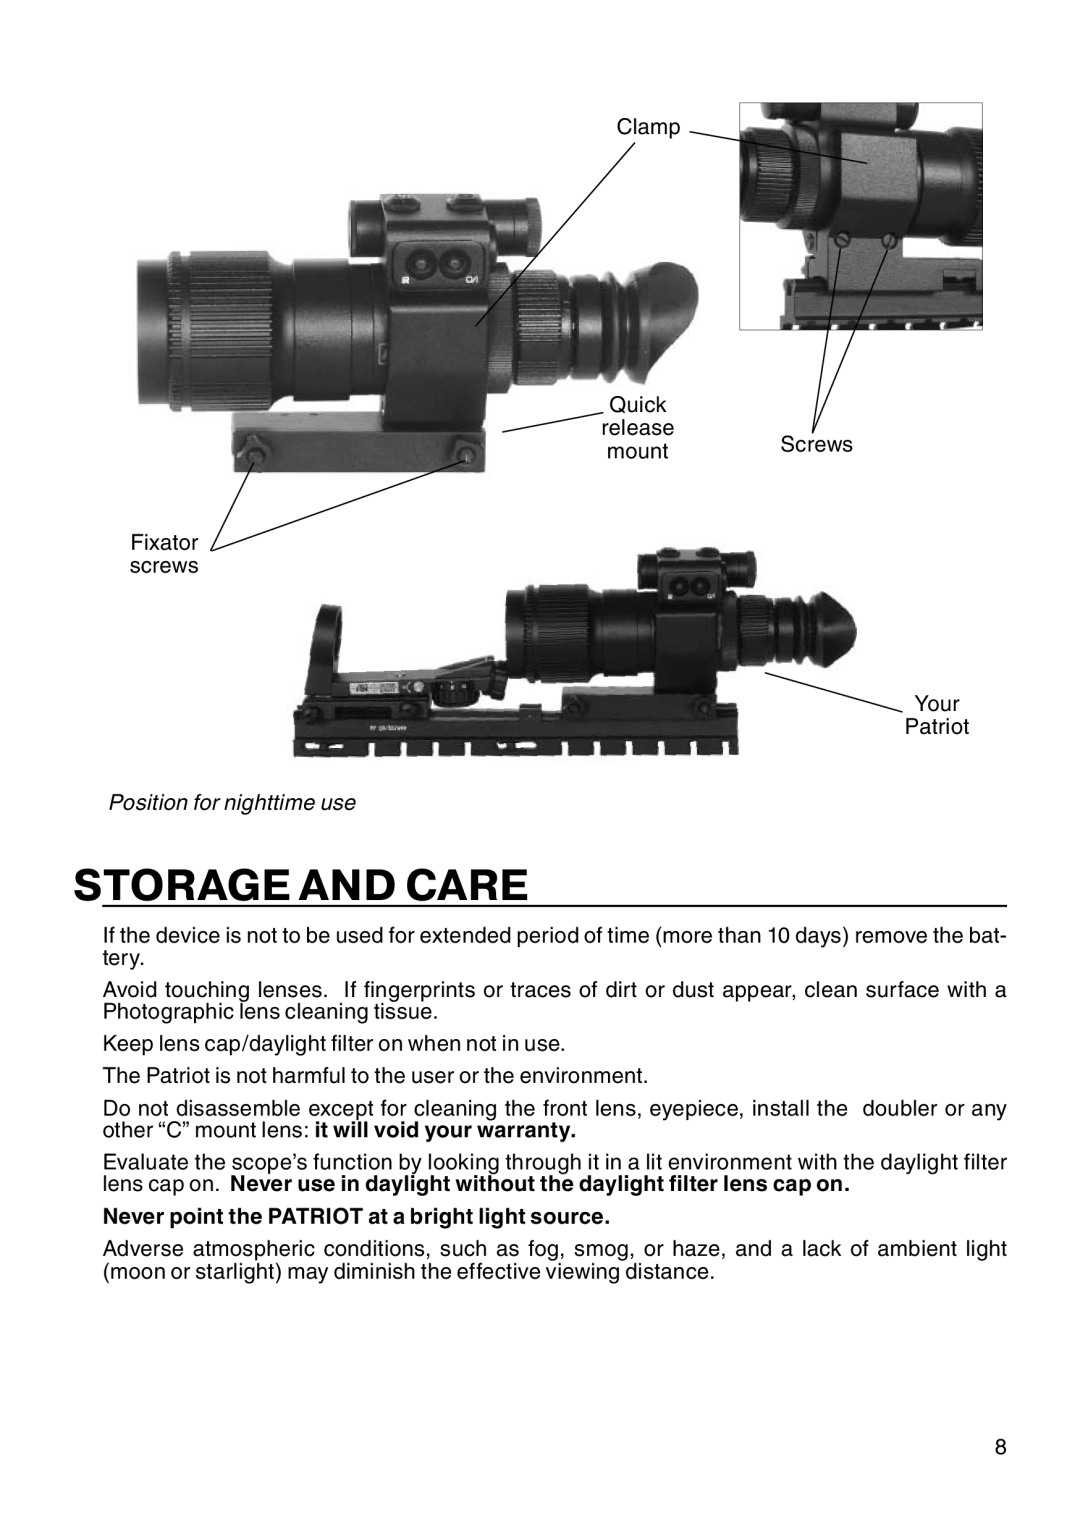 ATN Night Patriot manual Storage And Care, Never point the PATRIOT at a bright light source 